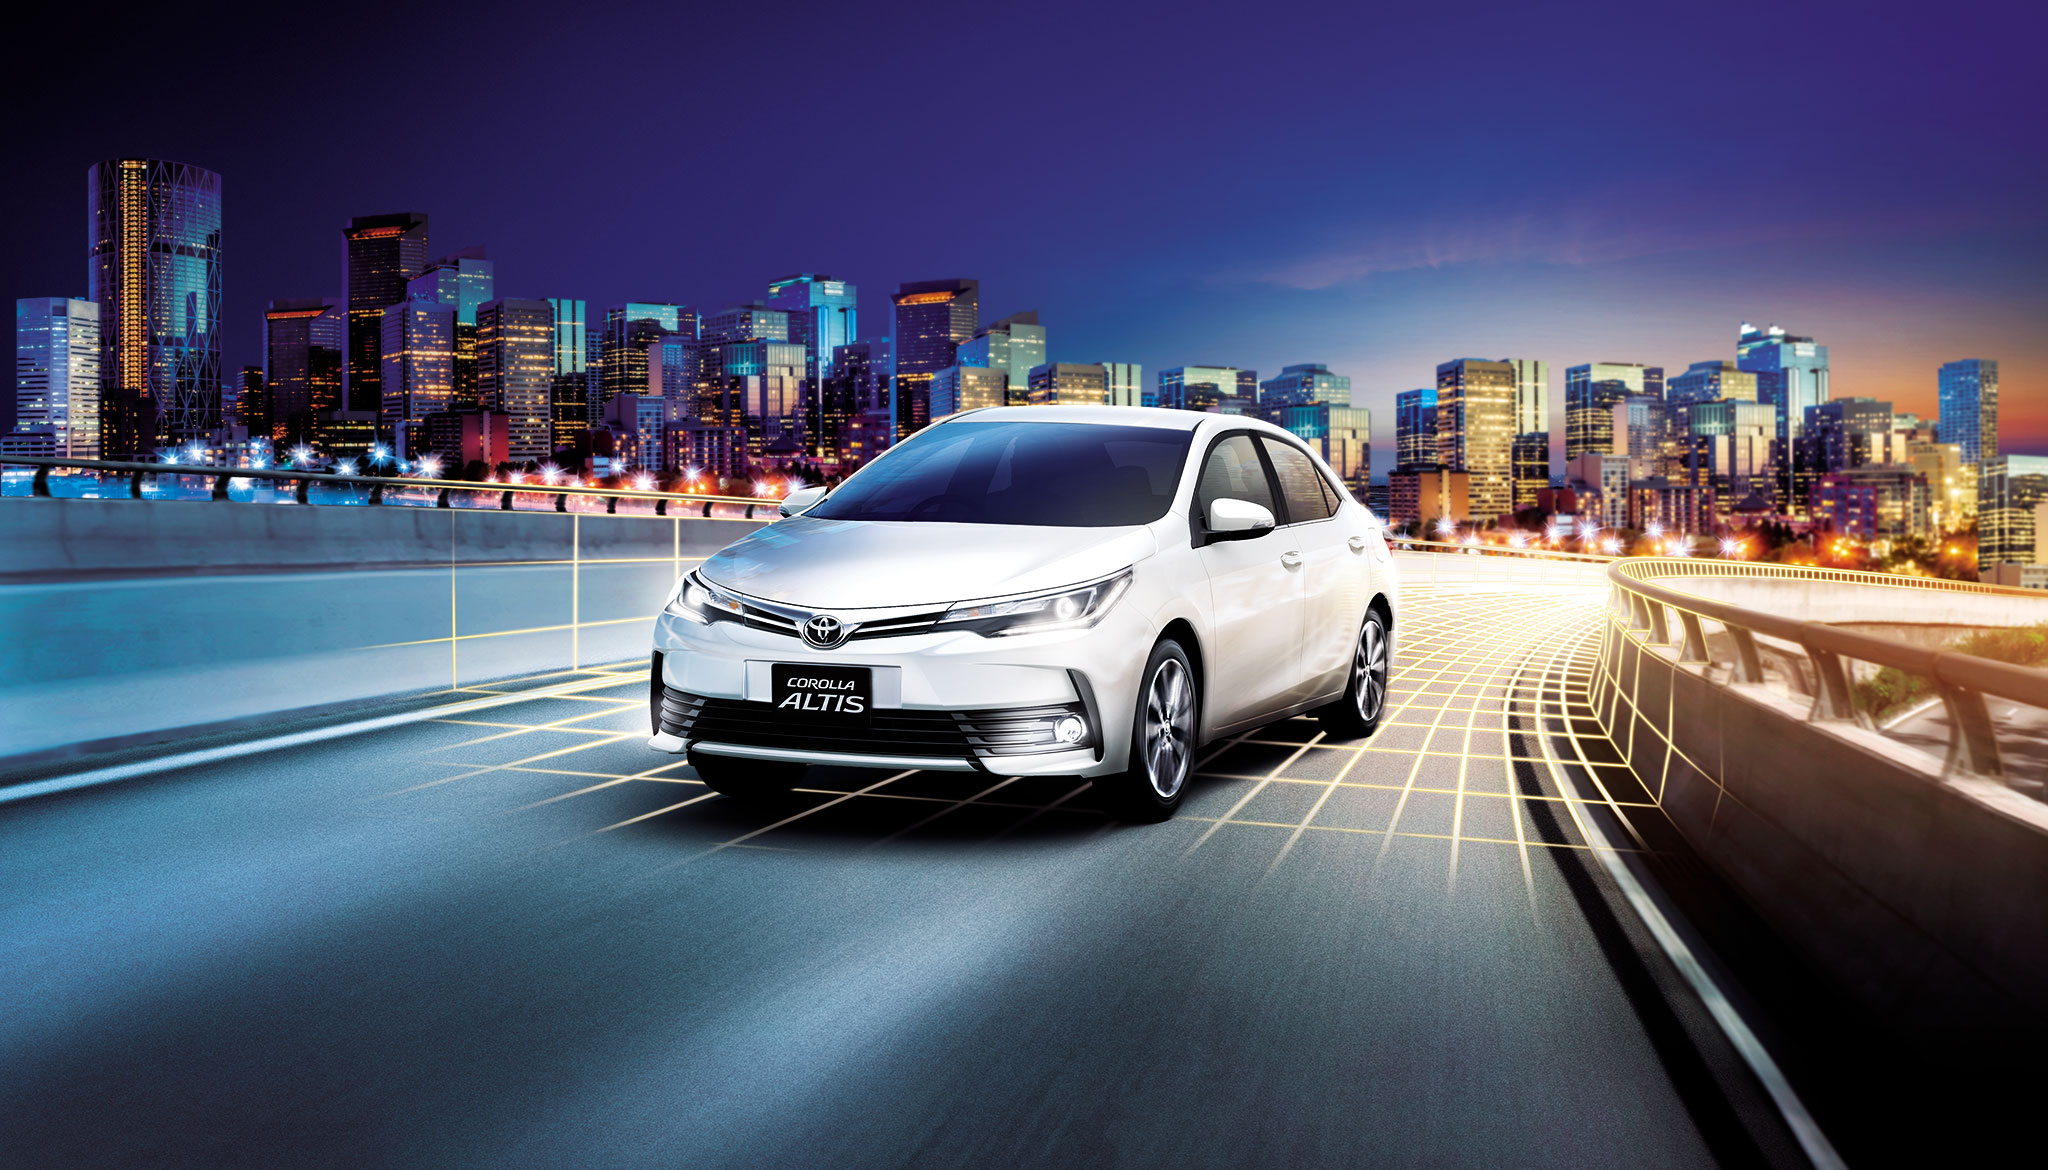 Toyota Corolla Altis | The World's Best-selling Car